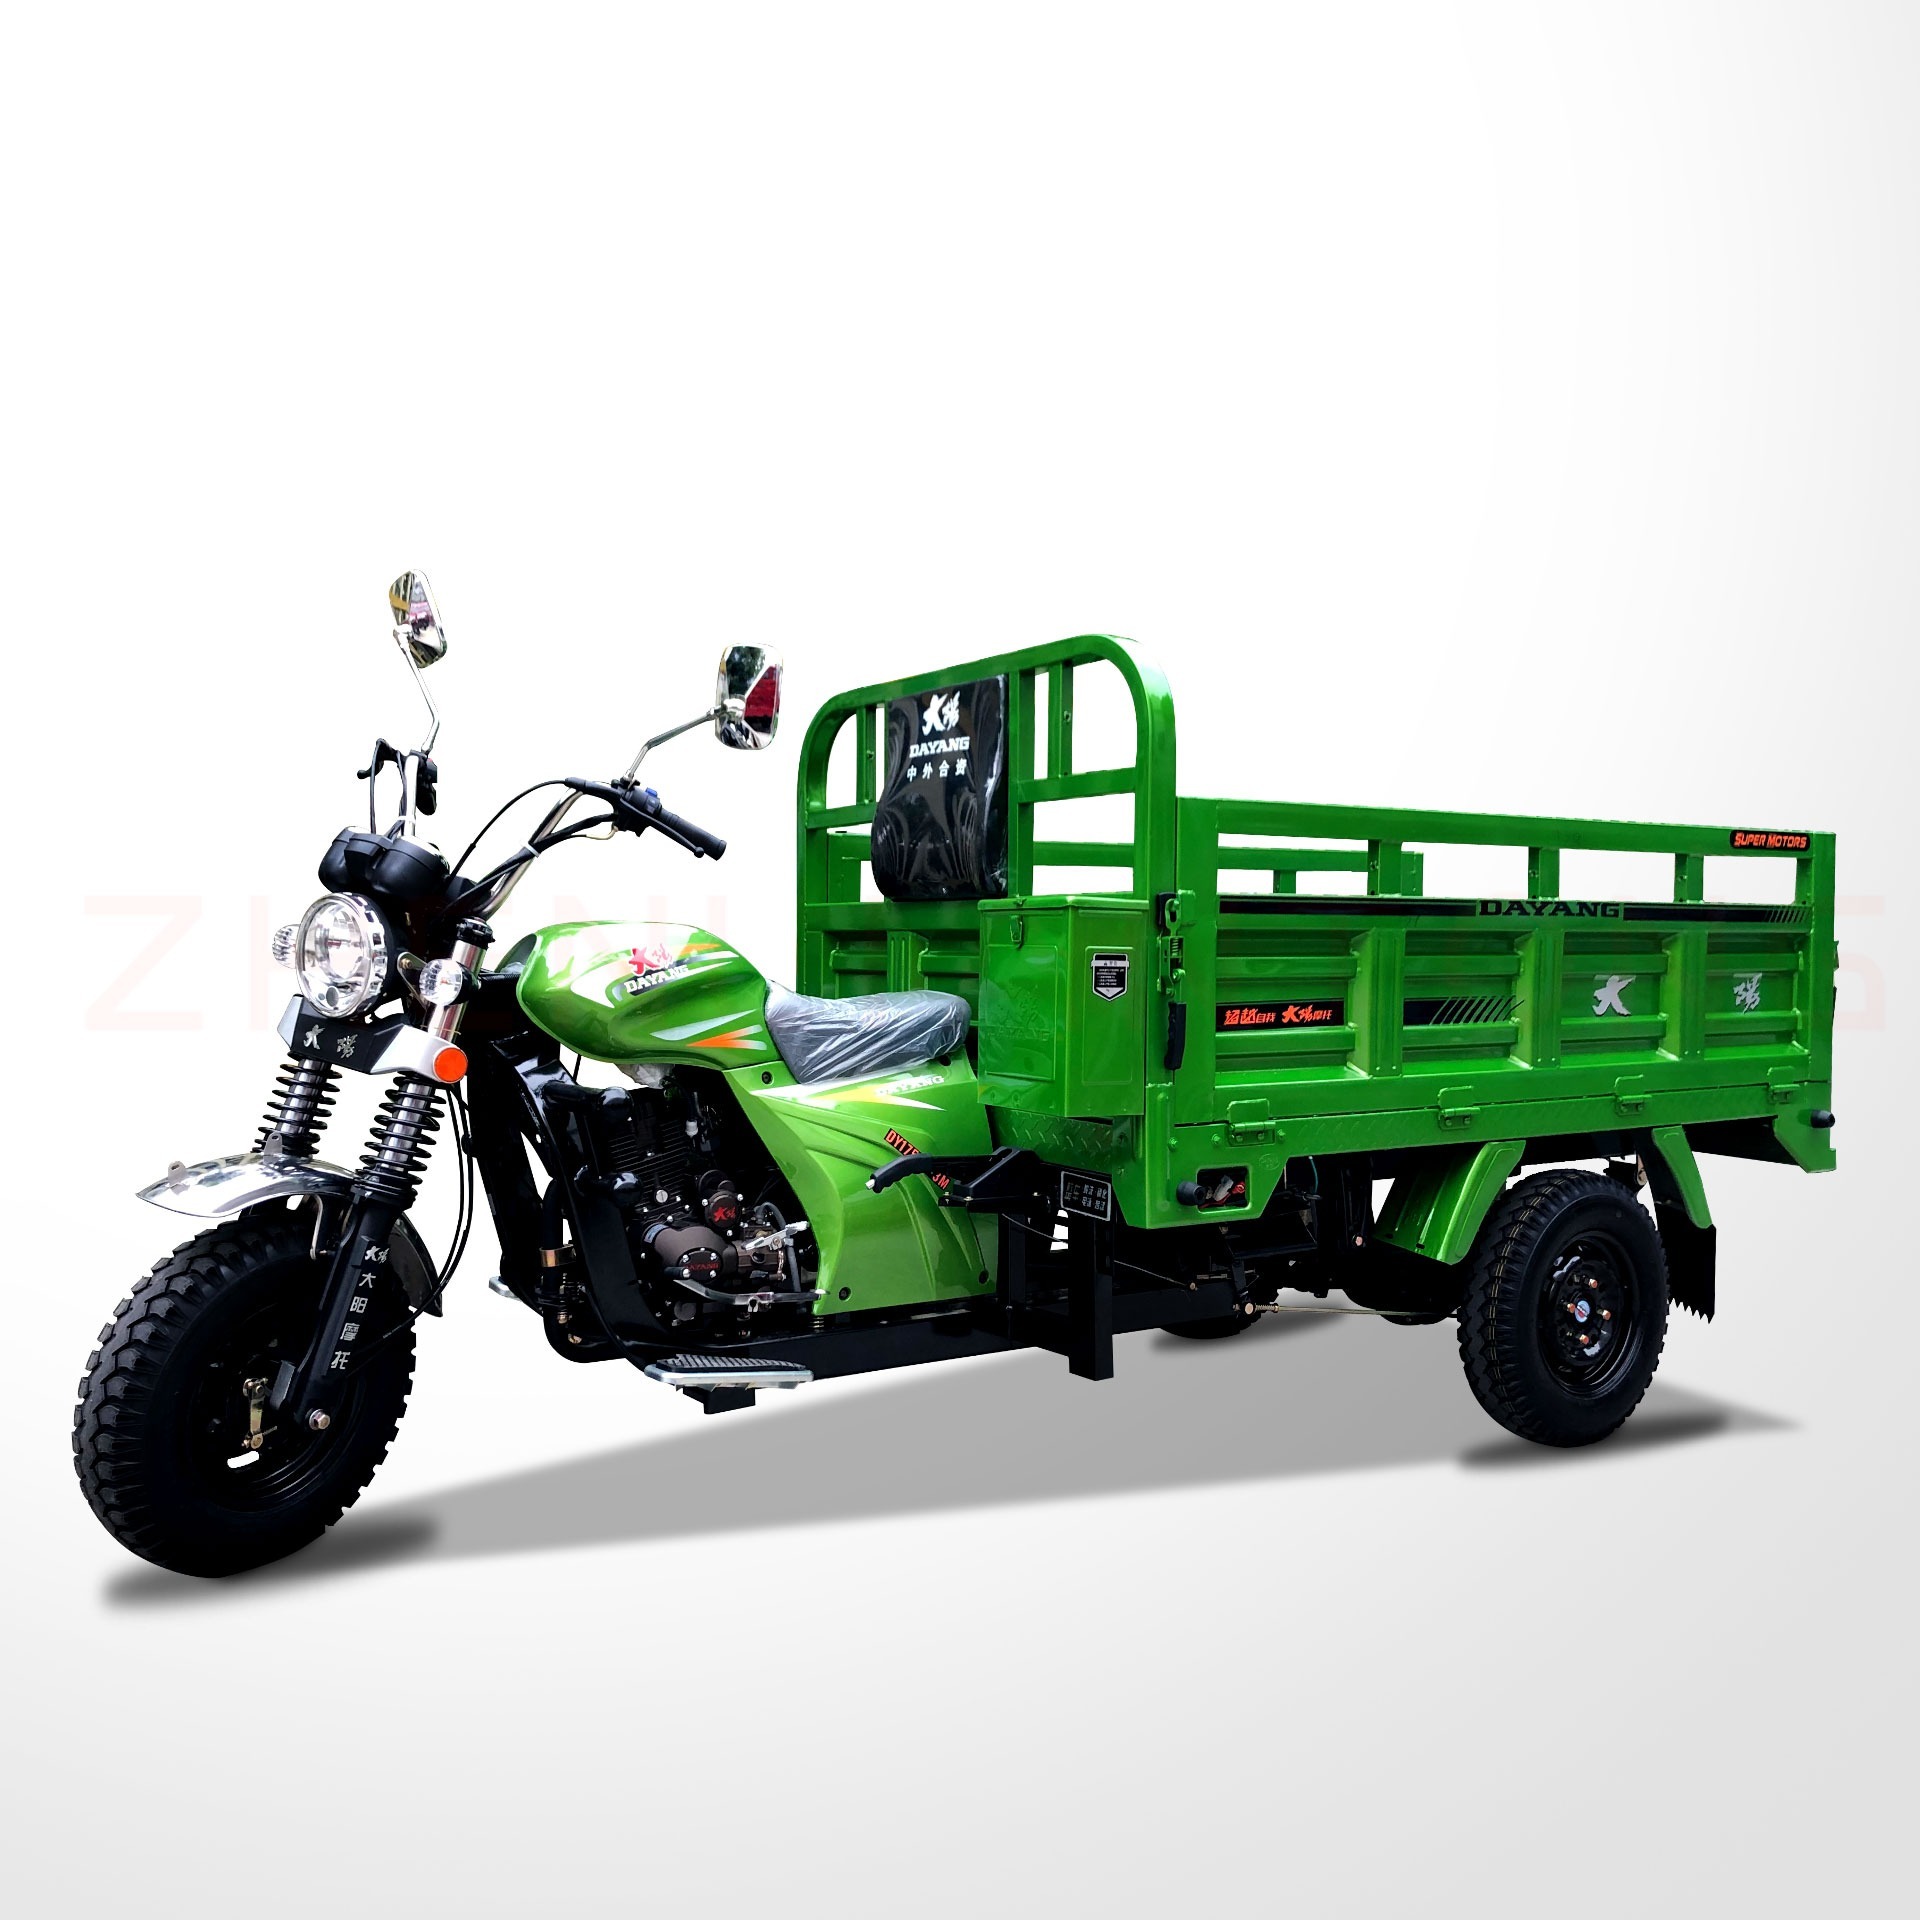 China Production Tanzania And Retail A Tricycle Motor Used Farm Delivery Tricycle Motorized Tricycles